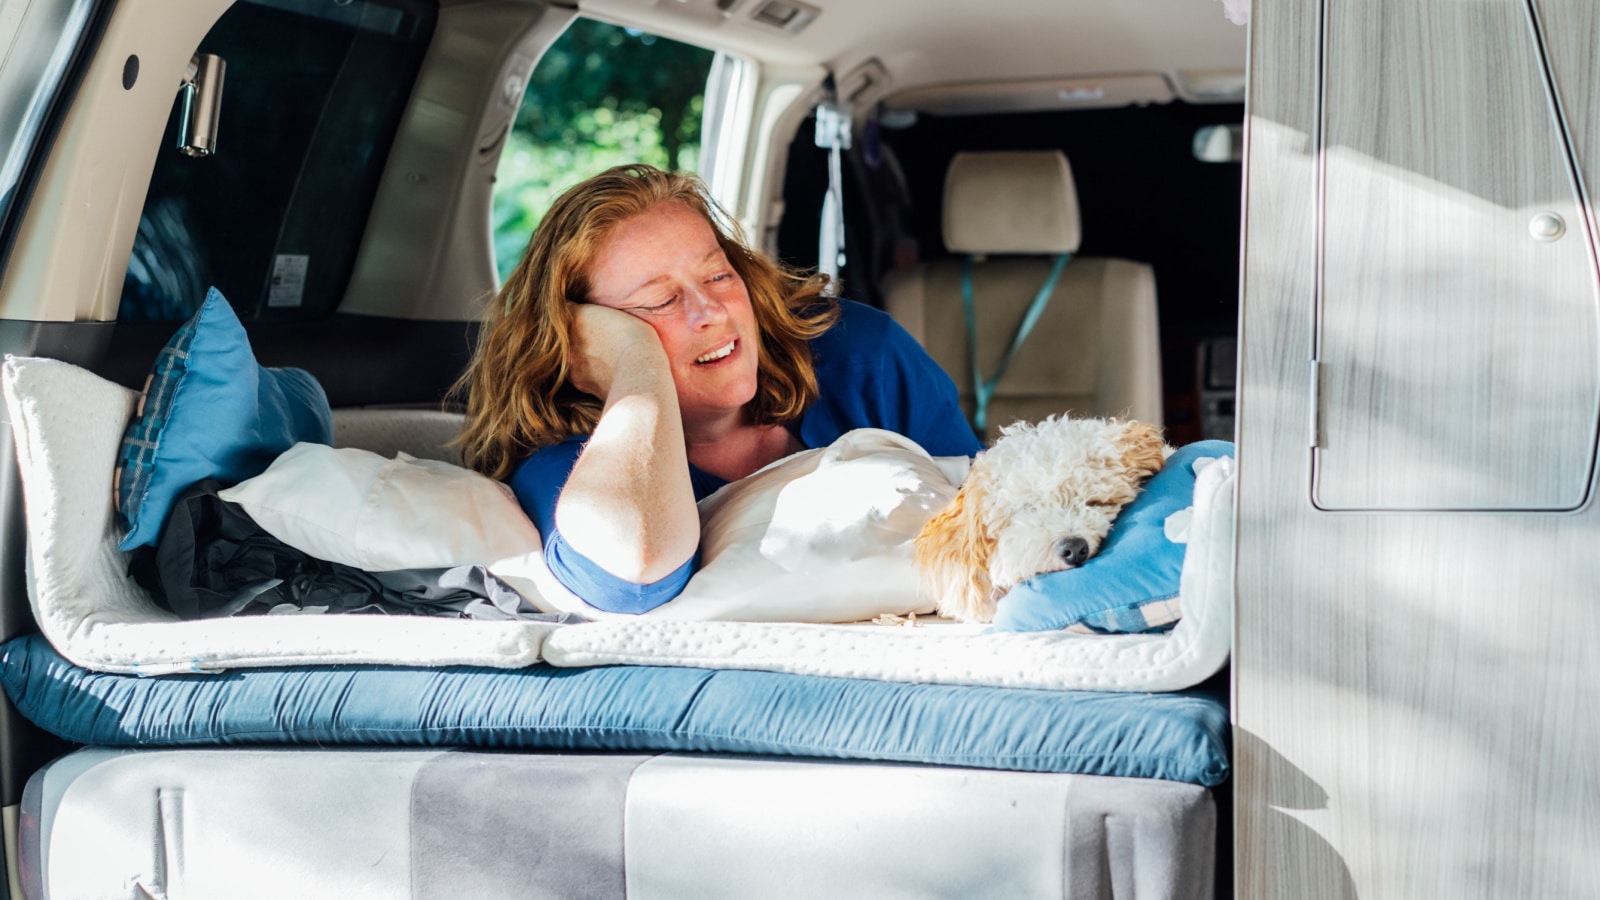 Smiling middle-aged woman looking on sleeping cockapoo puppy pet while lying in camper car vehicle during road trip. Window view. Best friend. Enjoying free lifestyle, travel, vacation, freedom.